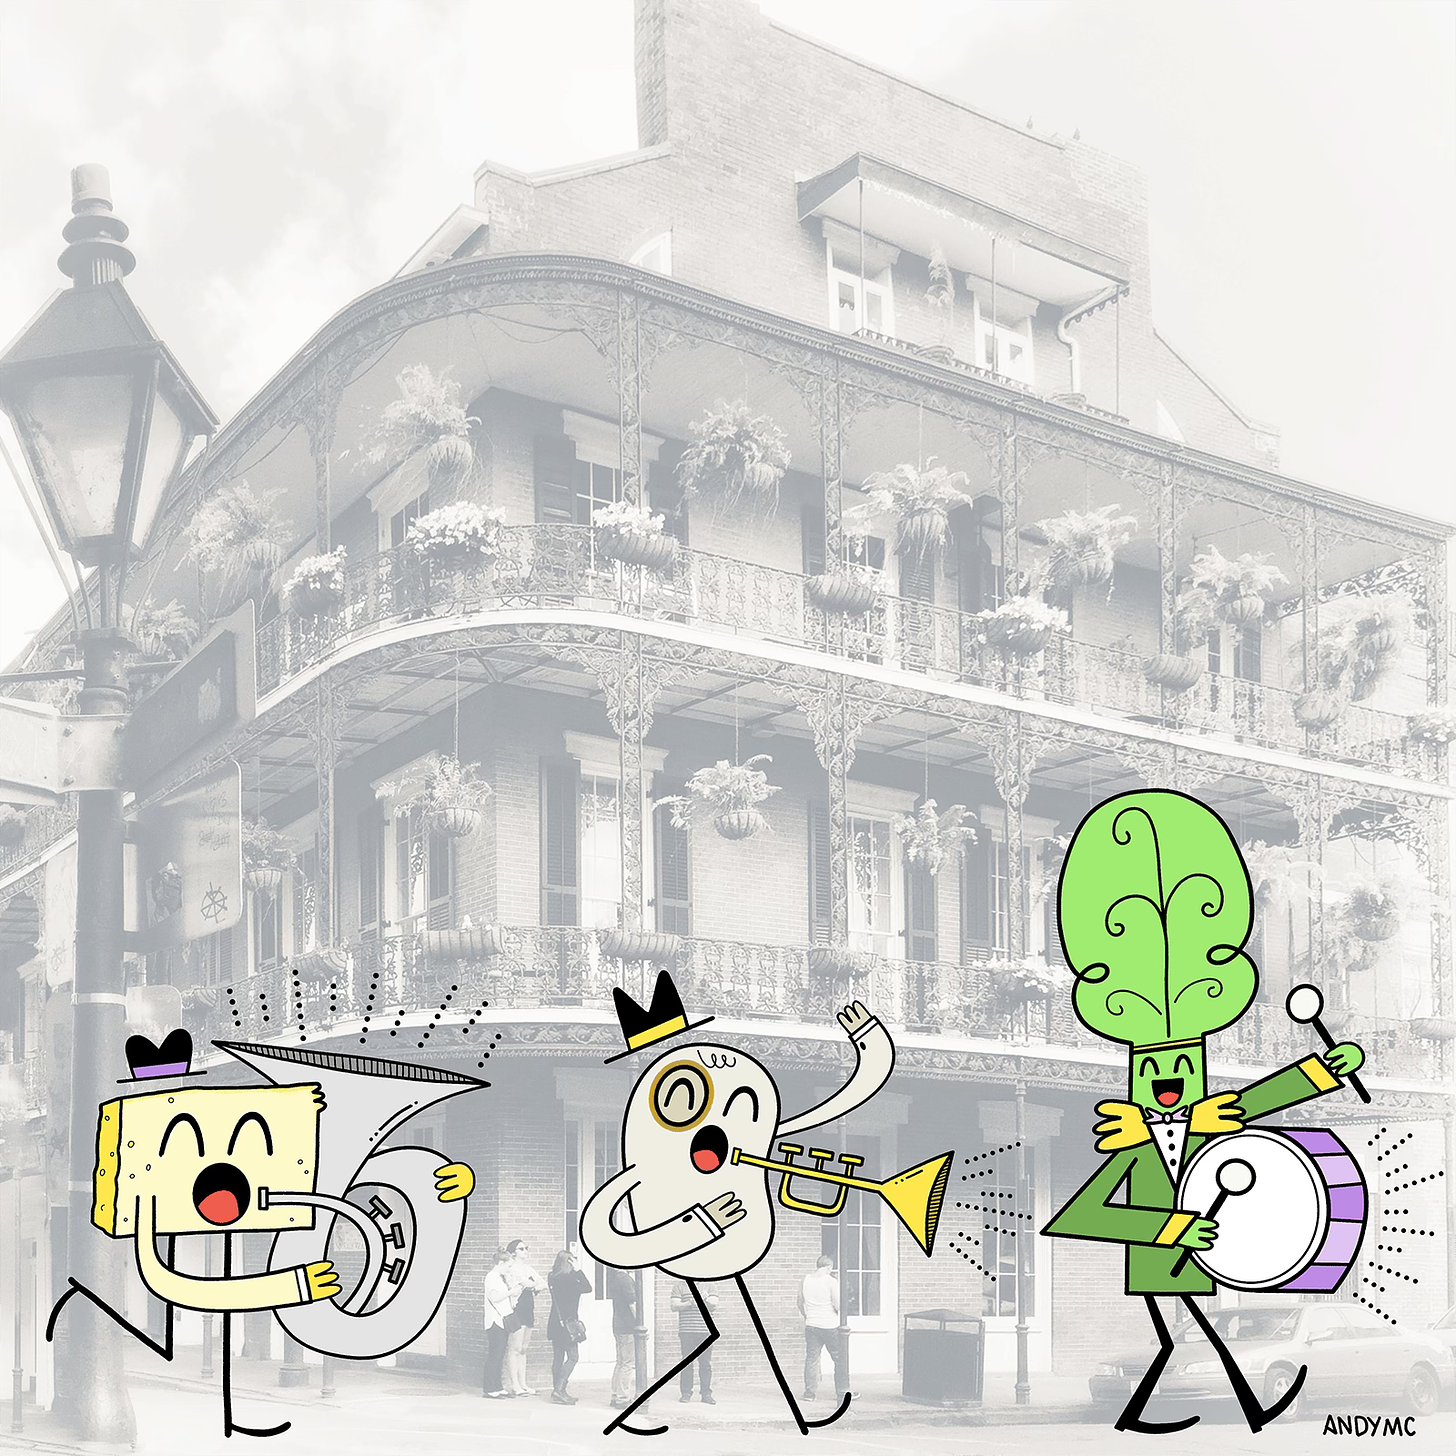 An illustration of a black eye pea, cornbread, and a collard green playing instruments in a parade on a New Orleans street.